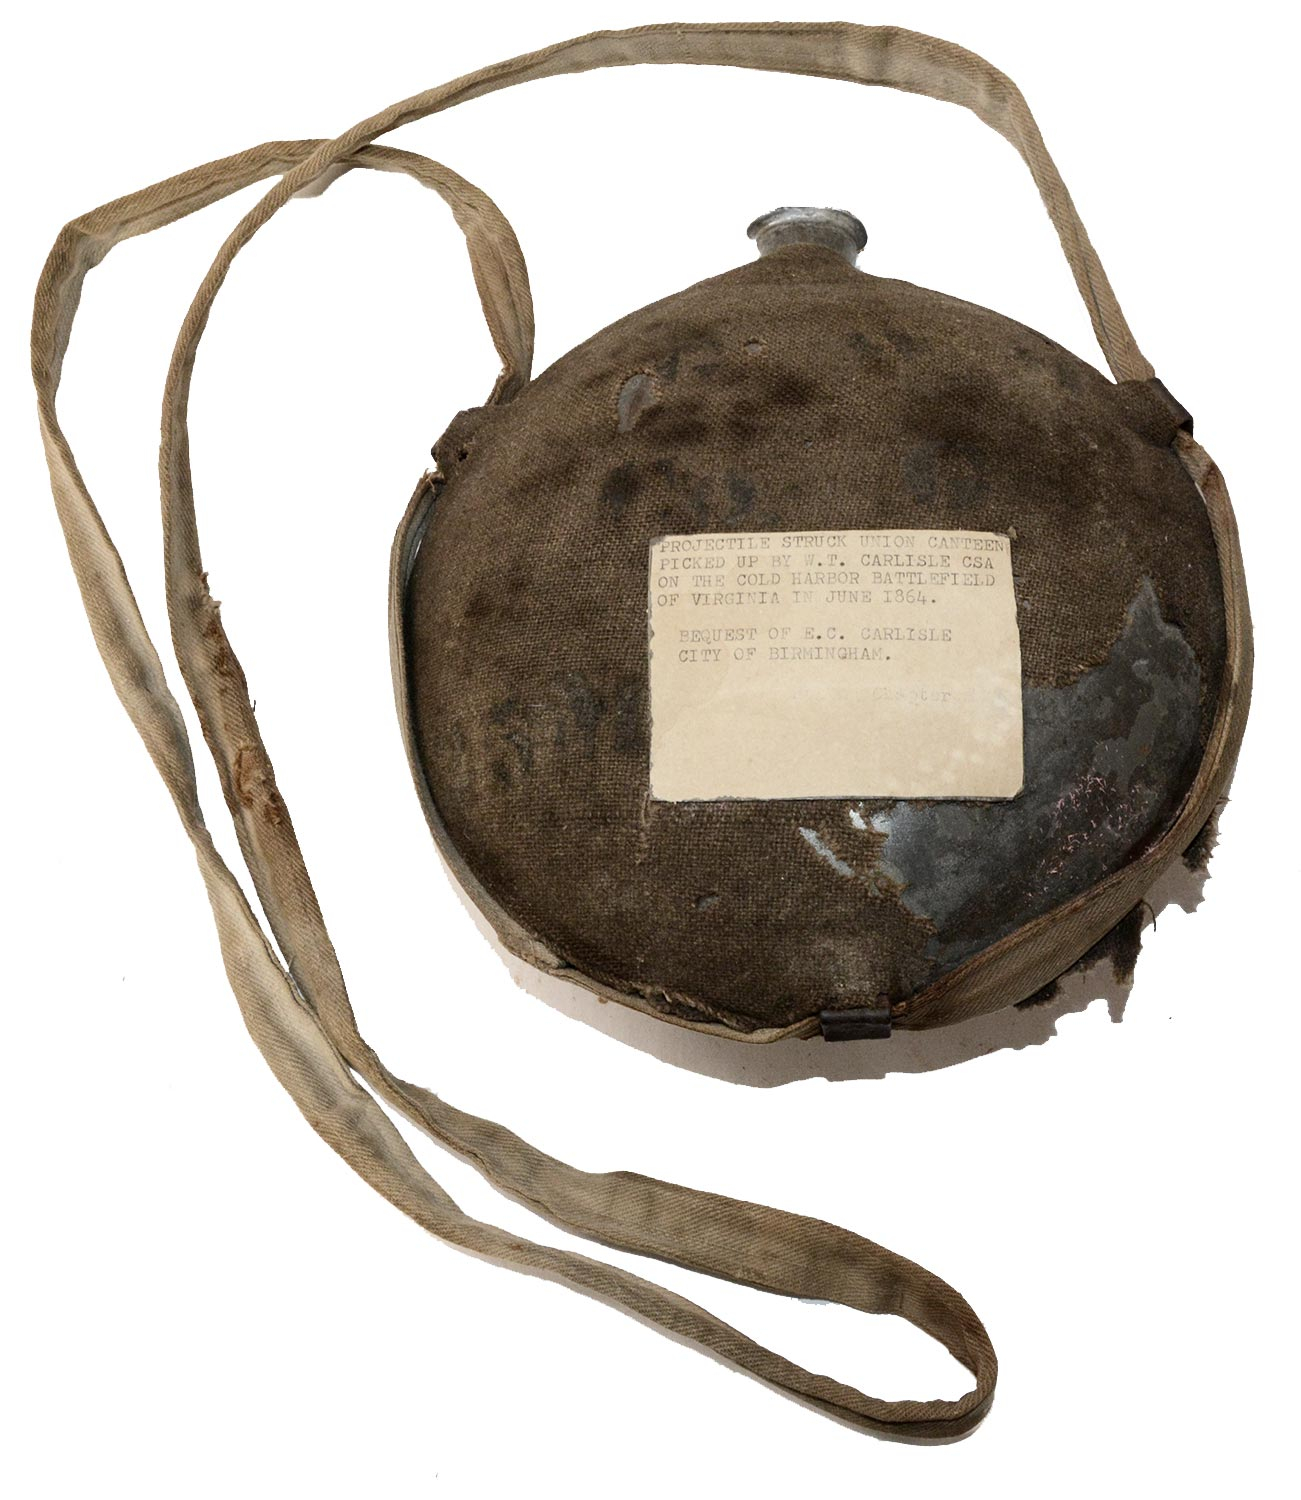 BATTLE DAMAGED 25TH MASSACHUSETTS CANTEEN PICKED UP AT COLD HARBOR